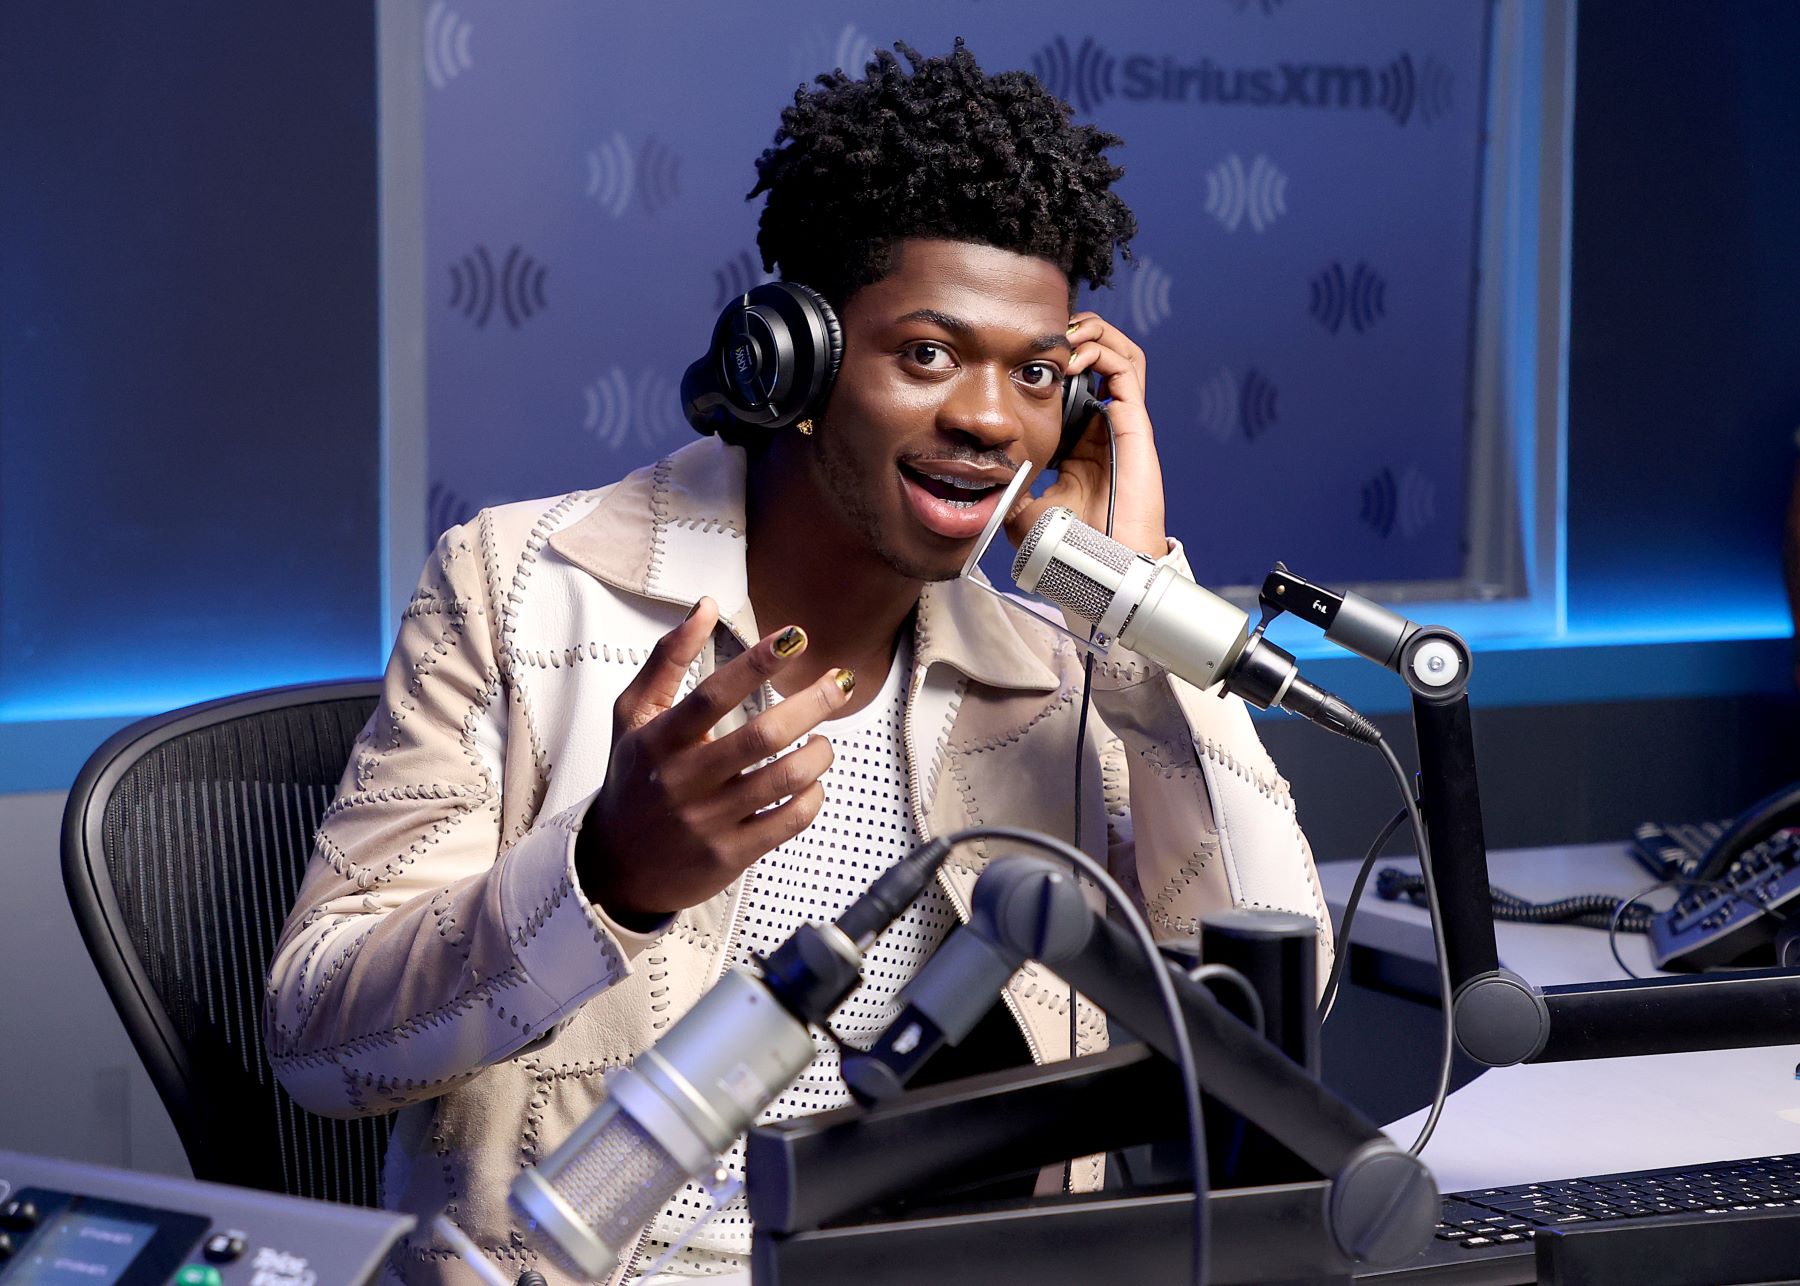 Lil Nas X at the SiriusXM "Morning Mash Up" in New York City